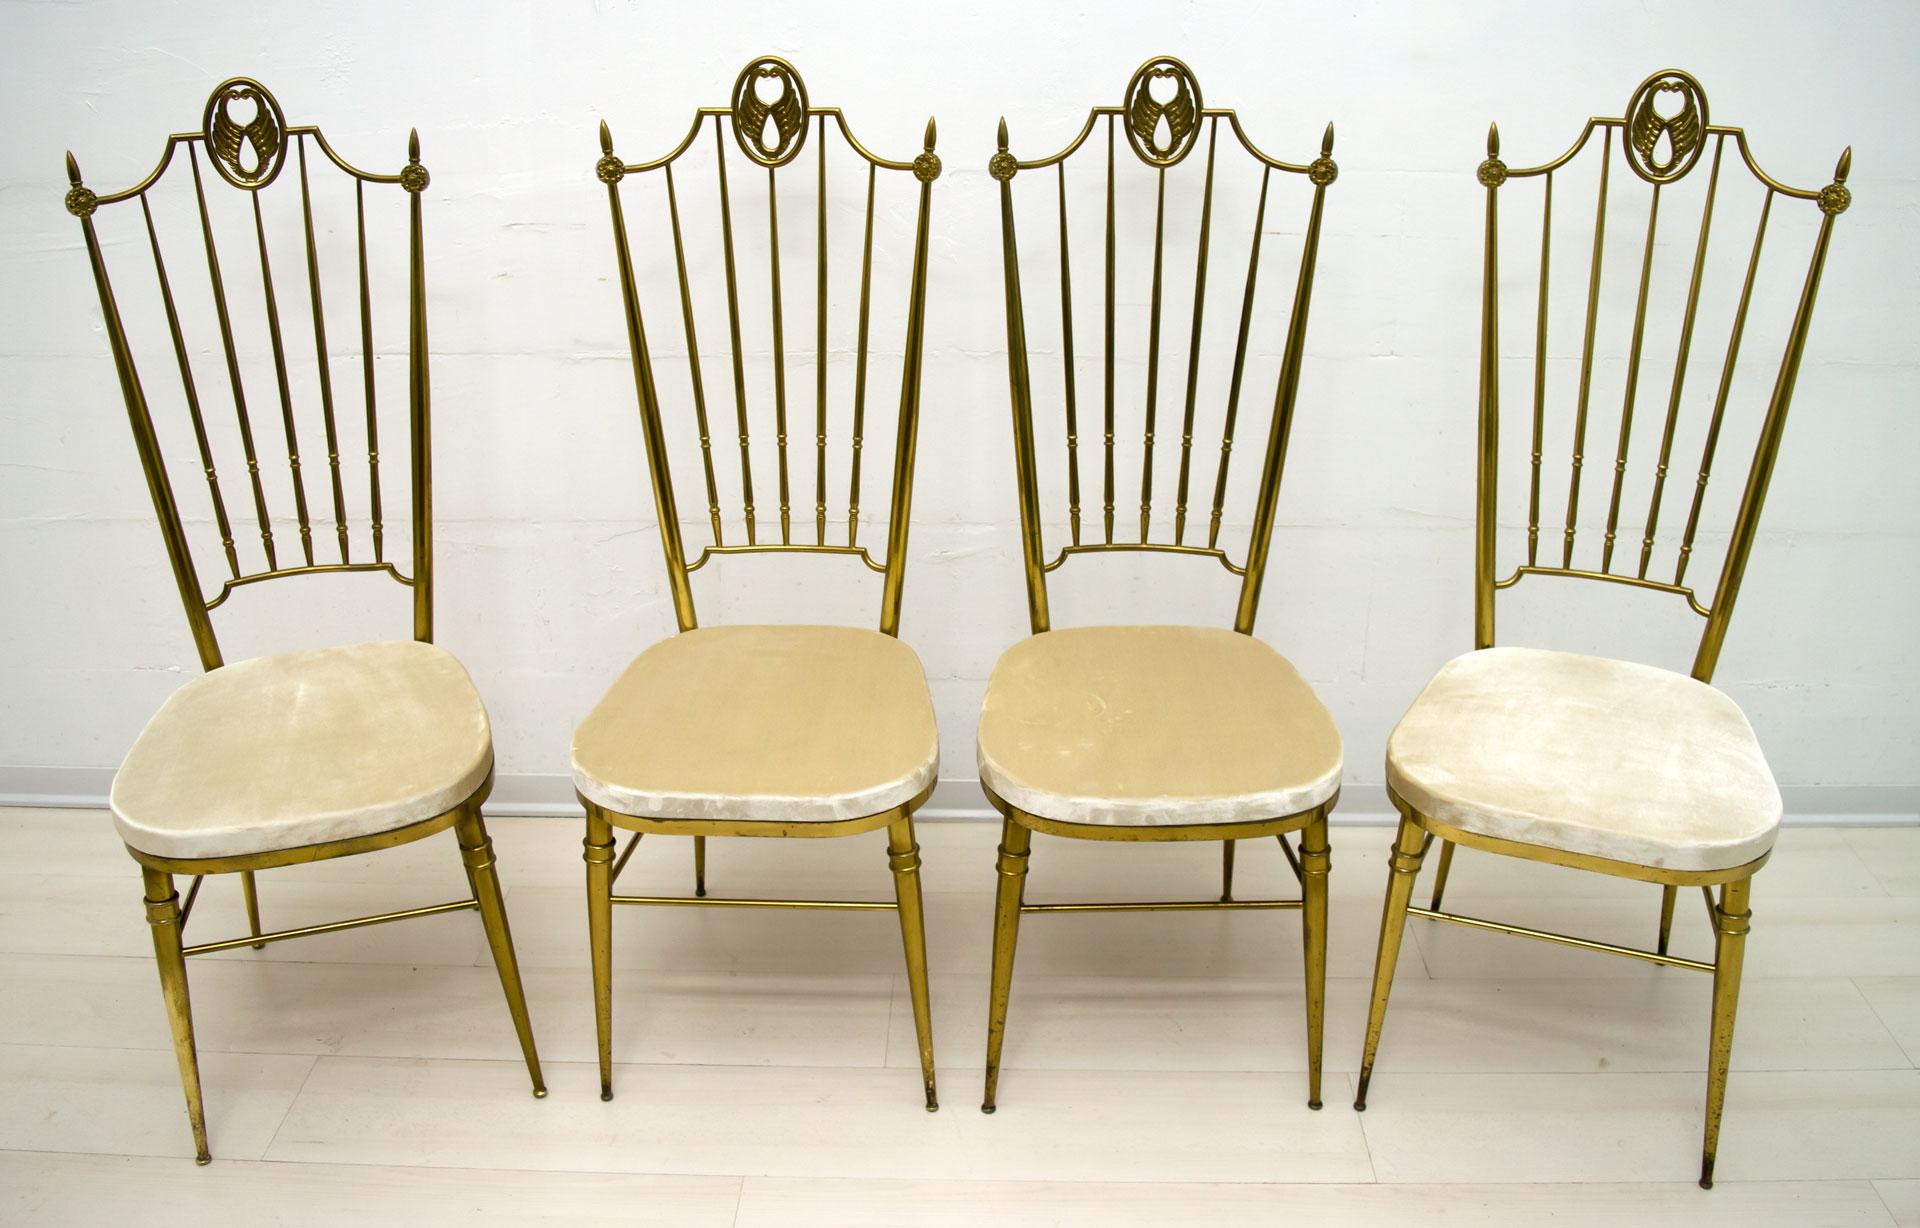 Four chairs with high back, Italian midcentury design in the Gio Ponti style.

